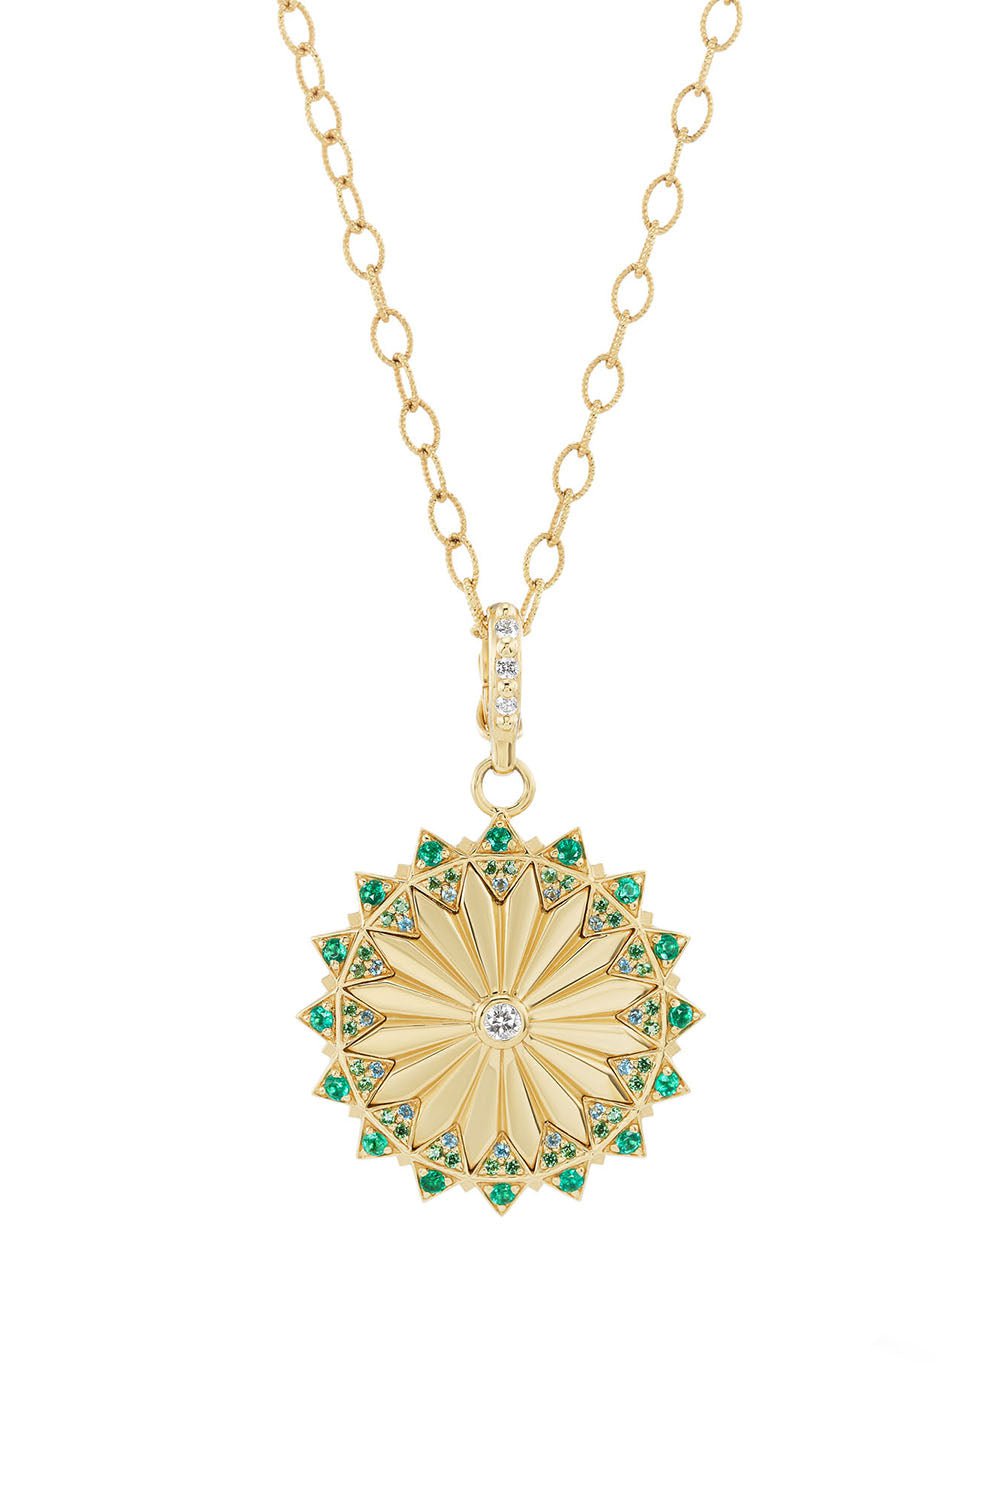 ORLY MARCEL-BE THE LIGHT EMERALD PENDANT NECKLACE-YELLOW GOLD